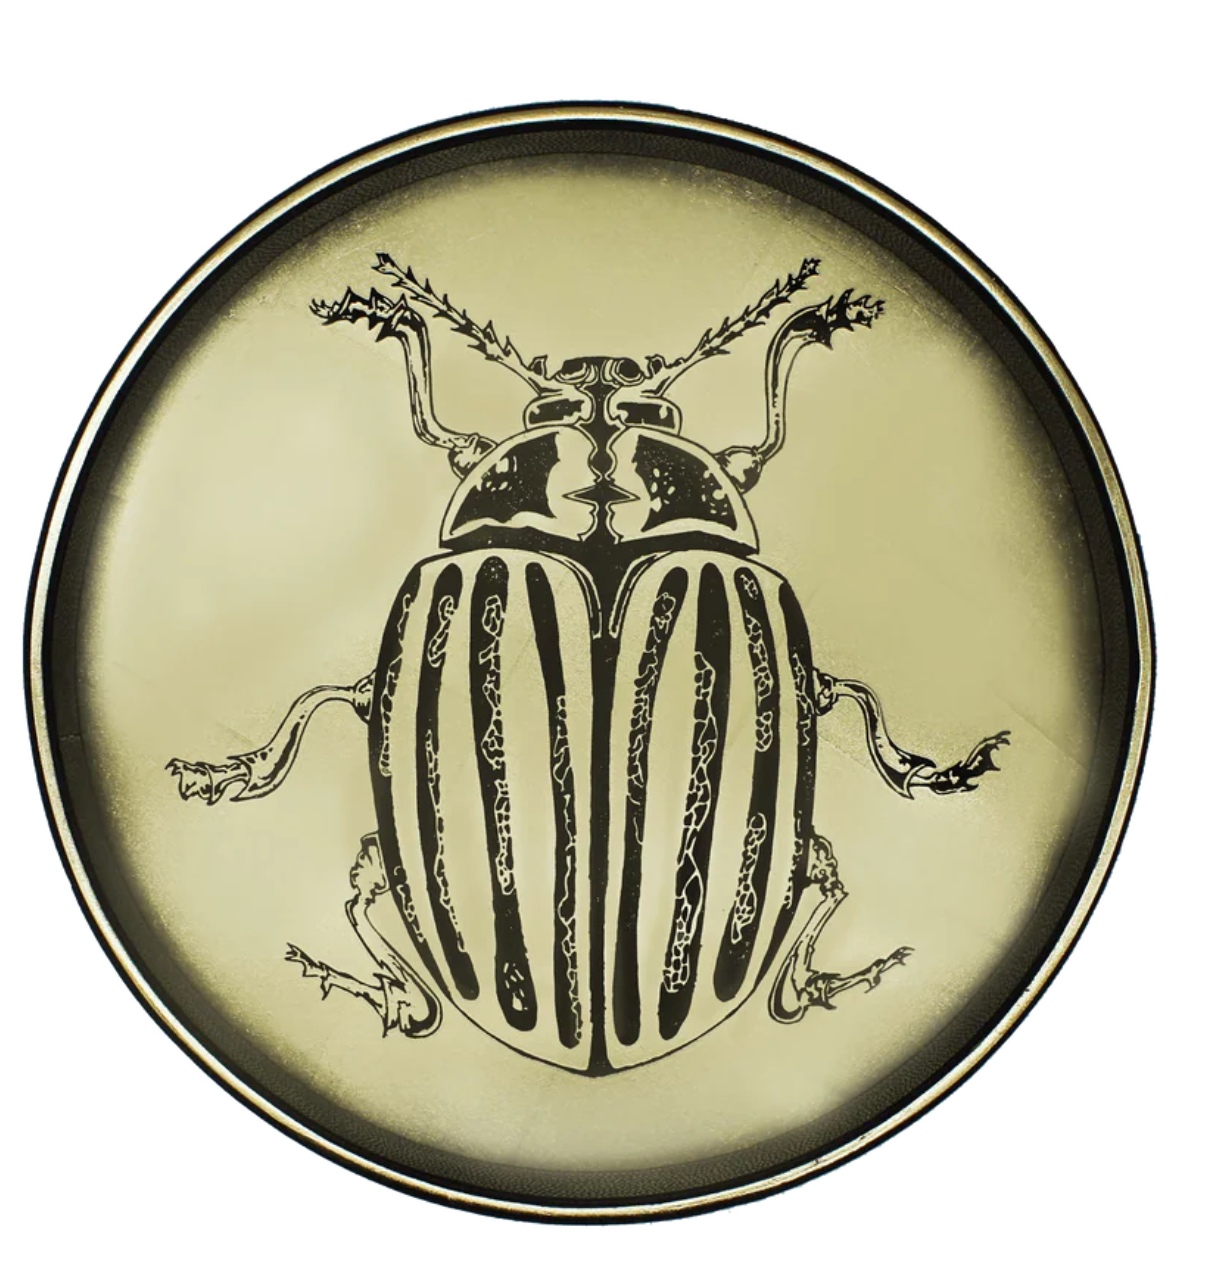 Gold Beetle Tray by Bell Hutley - The Grey Pearl